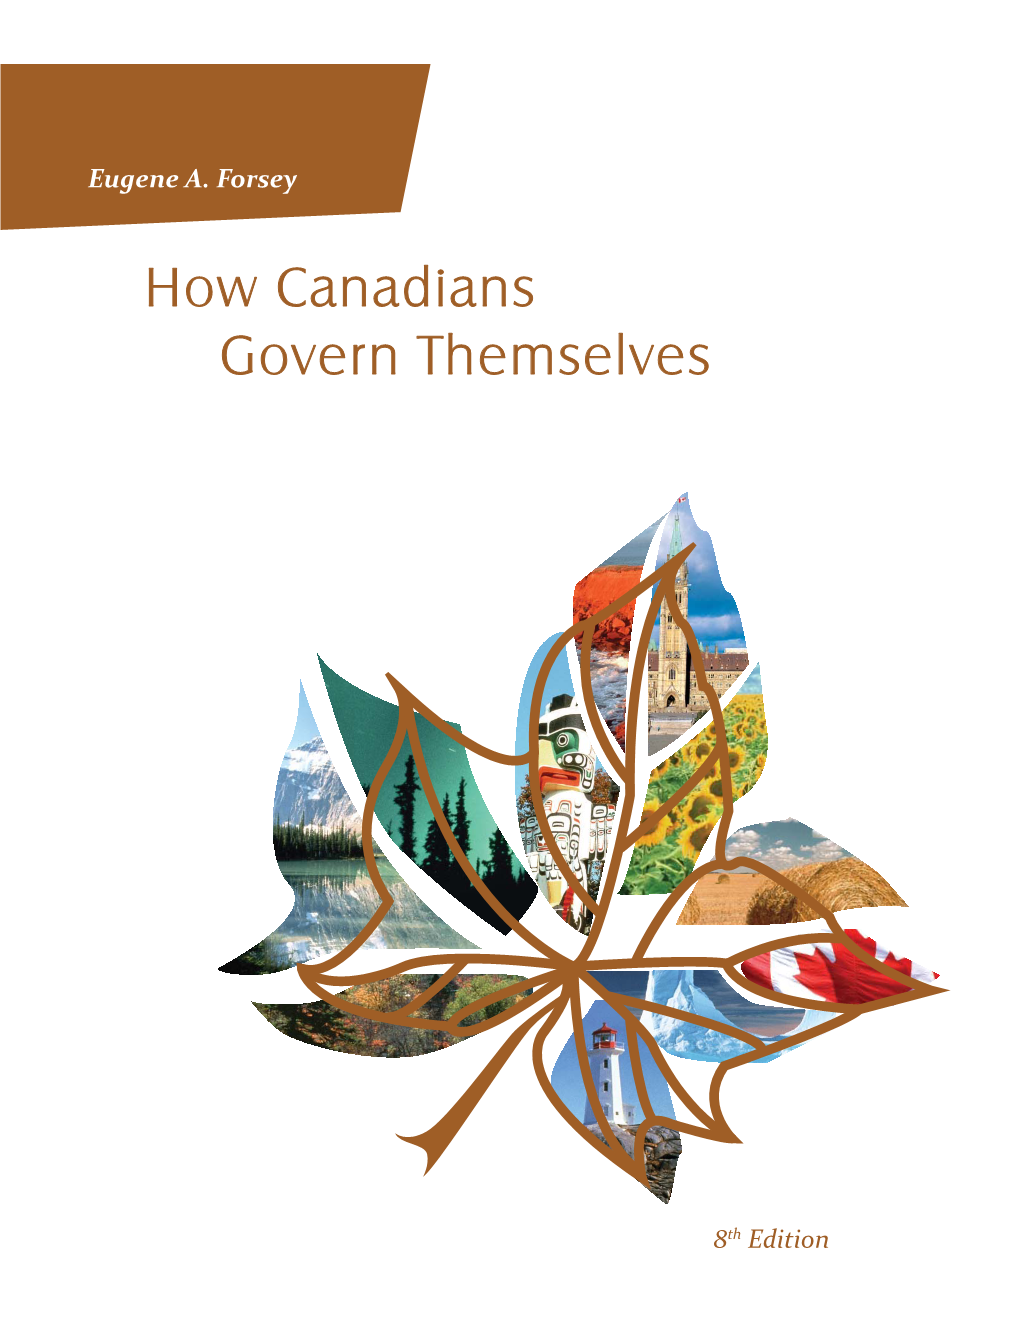 How Canadians Govern Themselves First Edition 1980 © Her Majesty the Queen in Right of Canada